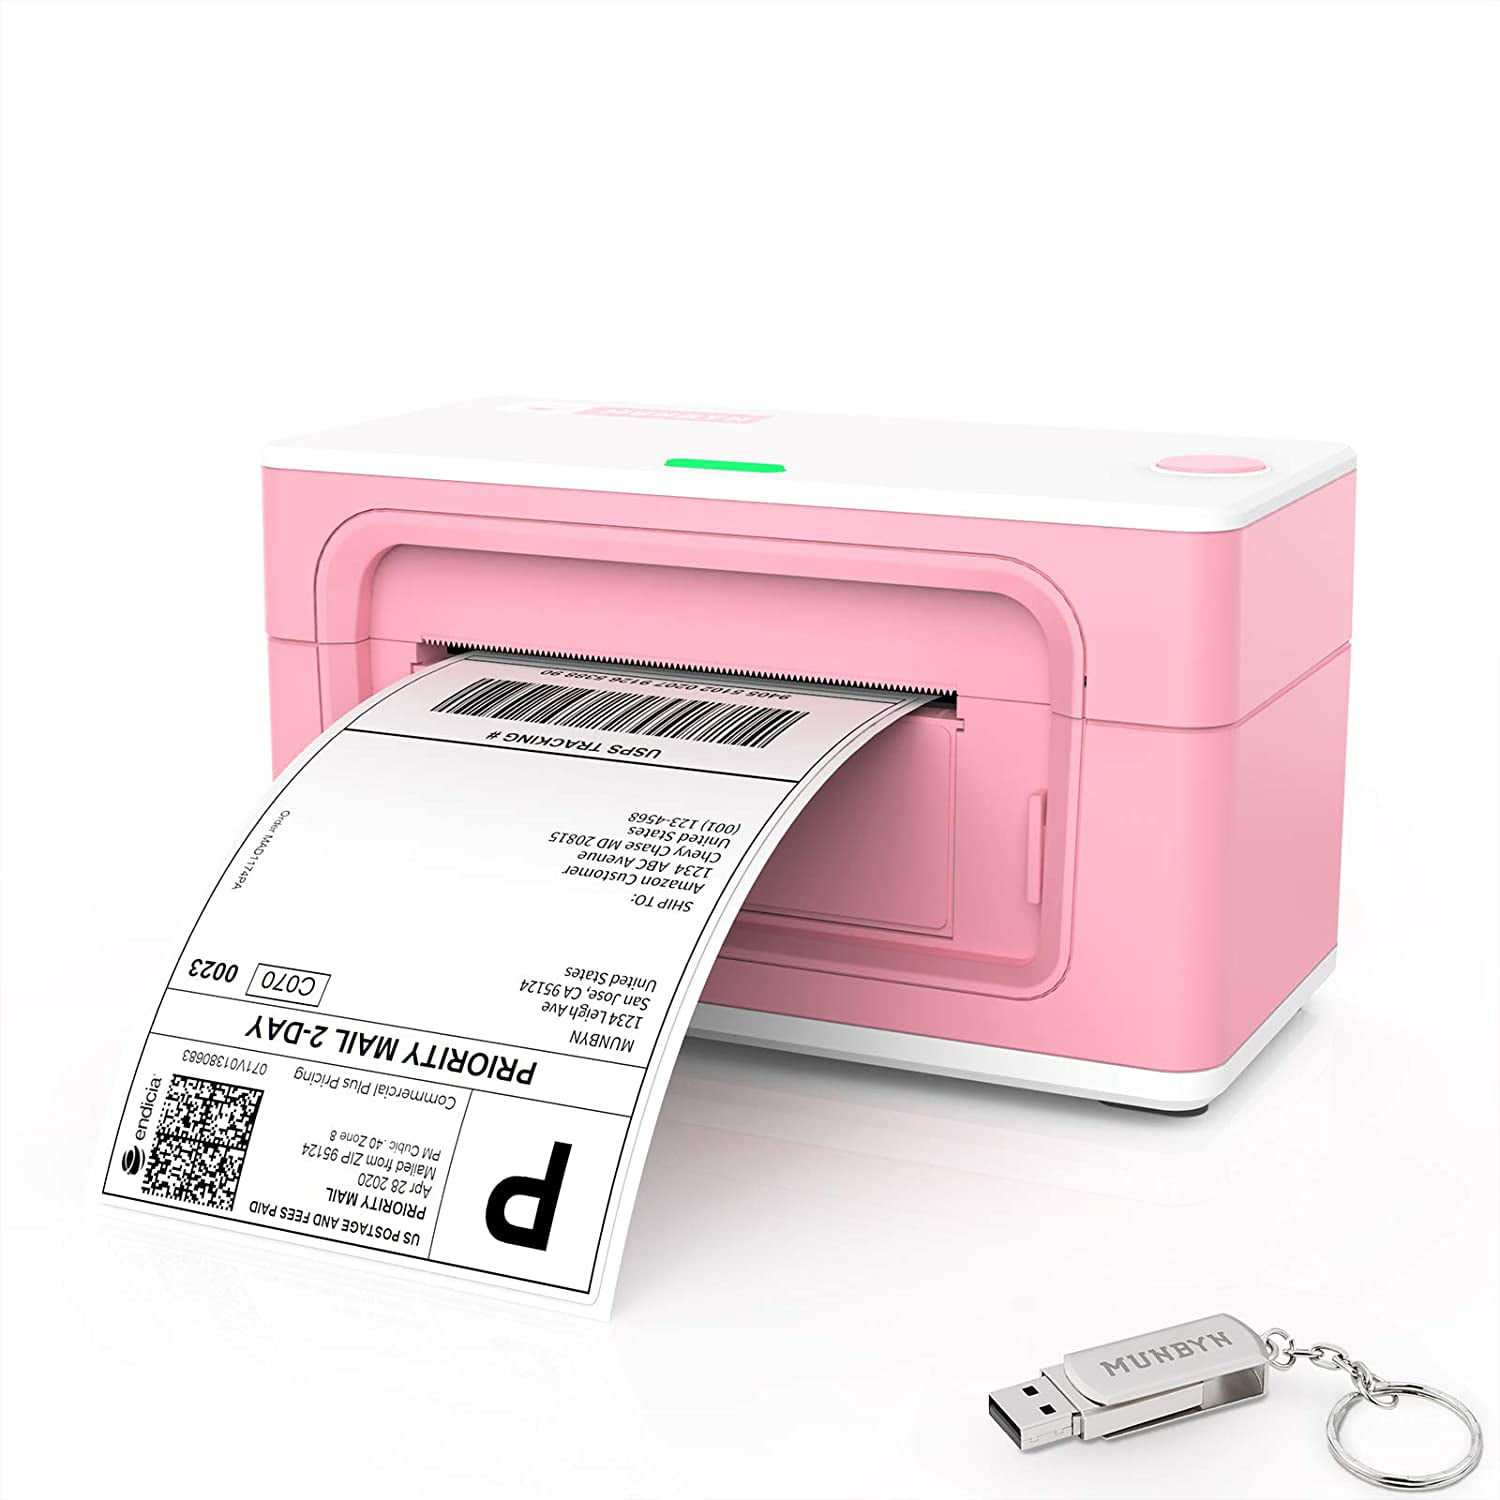 Pink Shipping Label Printer, MUNBYN Label Printer Maker for Shipping Packages MUNBYN Thermal Direct Shipping Label External Rolls Label Holder Upgraded 2.0 